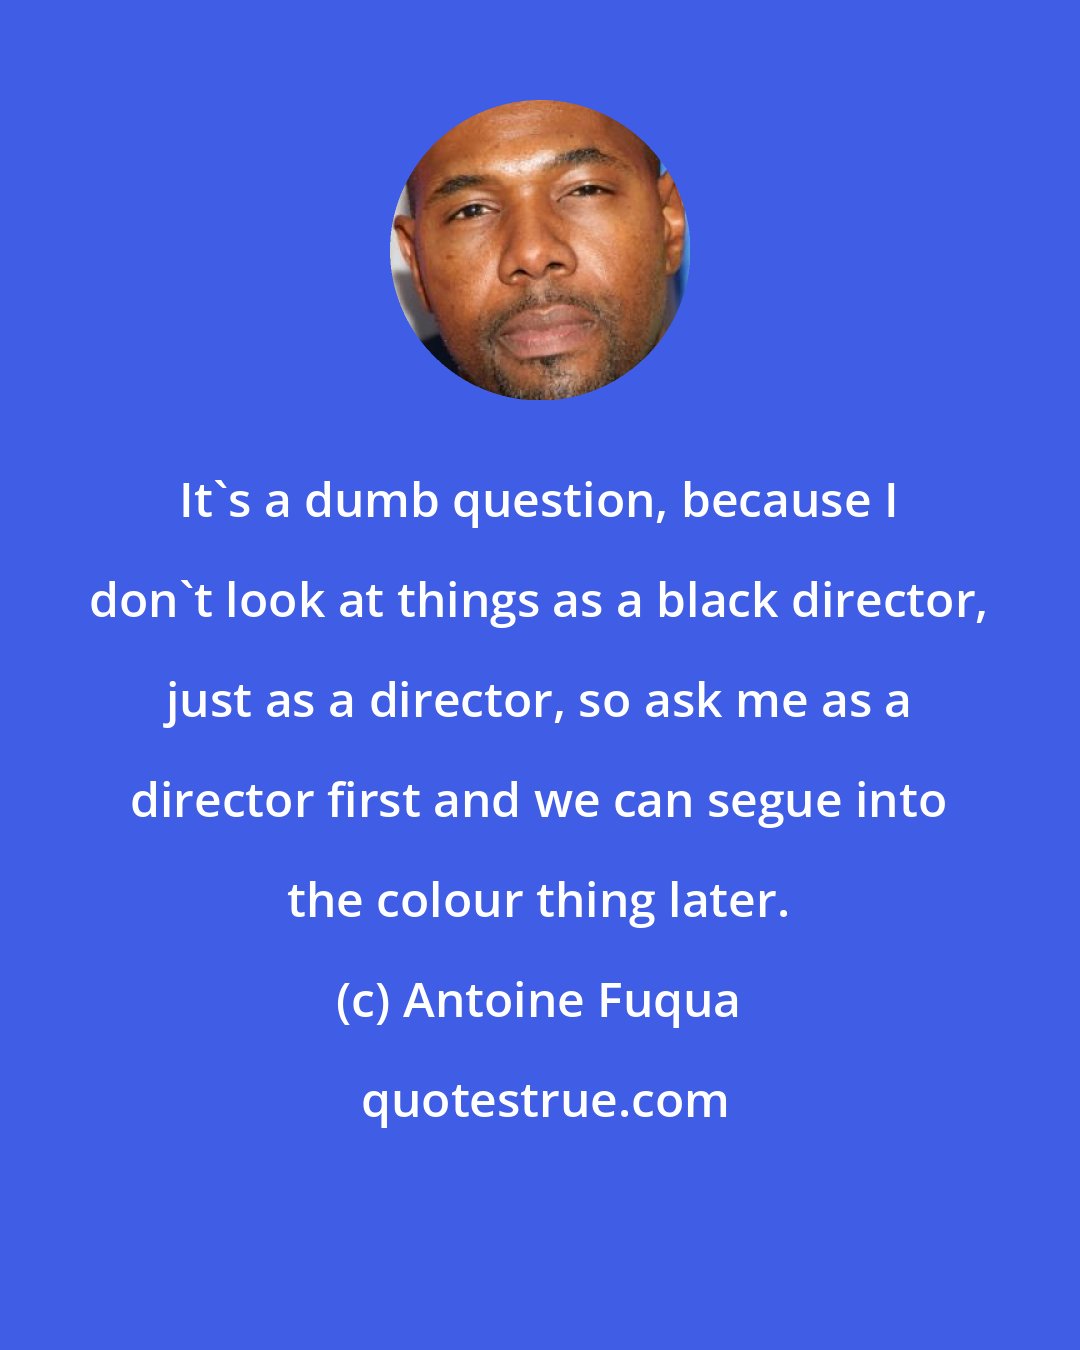 Antoine Fuqua: It's a dumb question, because I don't look at things as a black director, just as a director, so ask me as a director first and we can segue into the colour thing later.